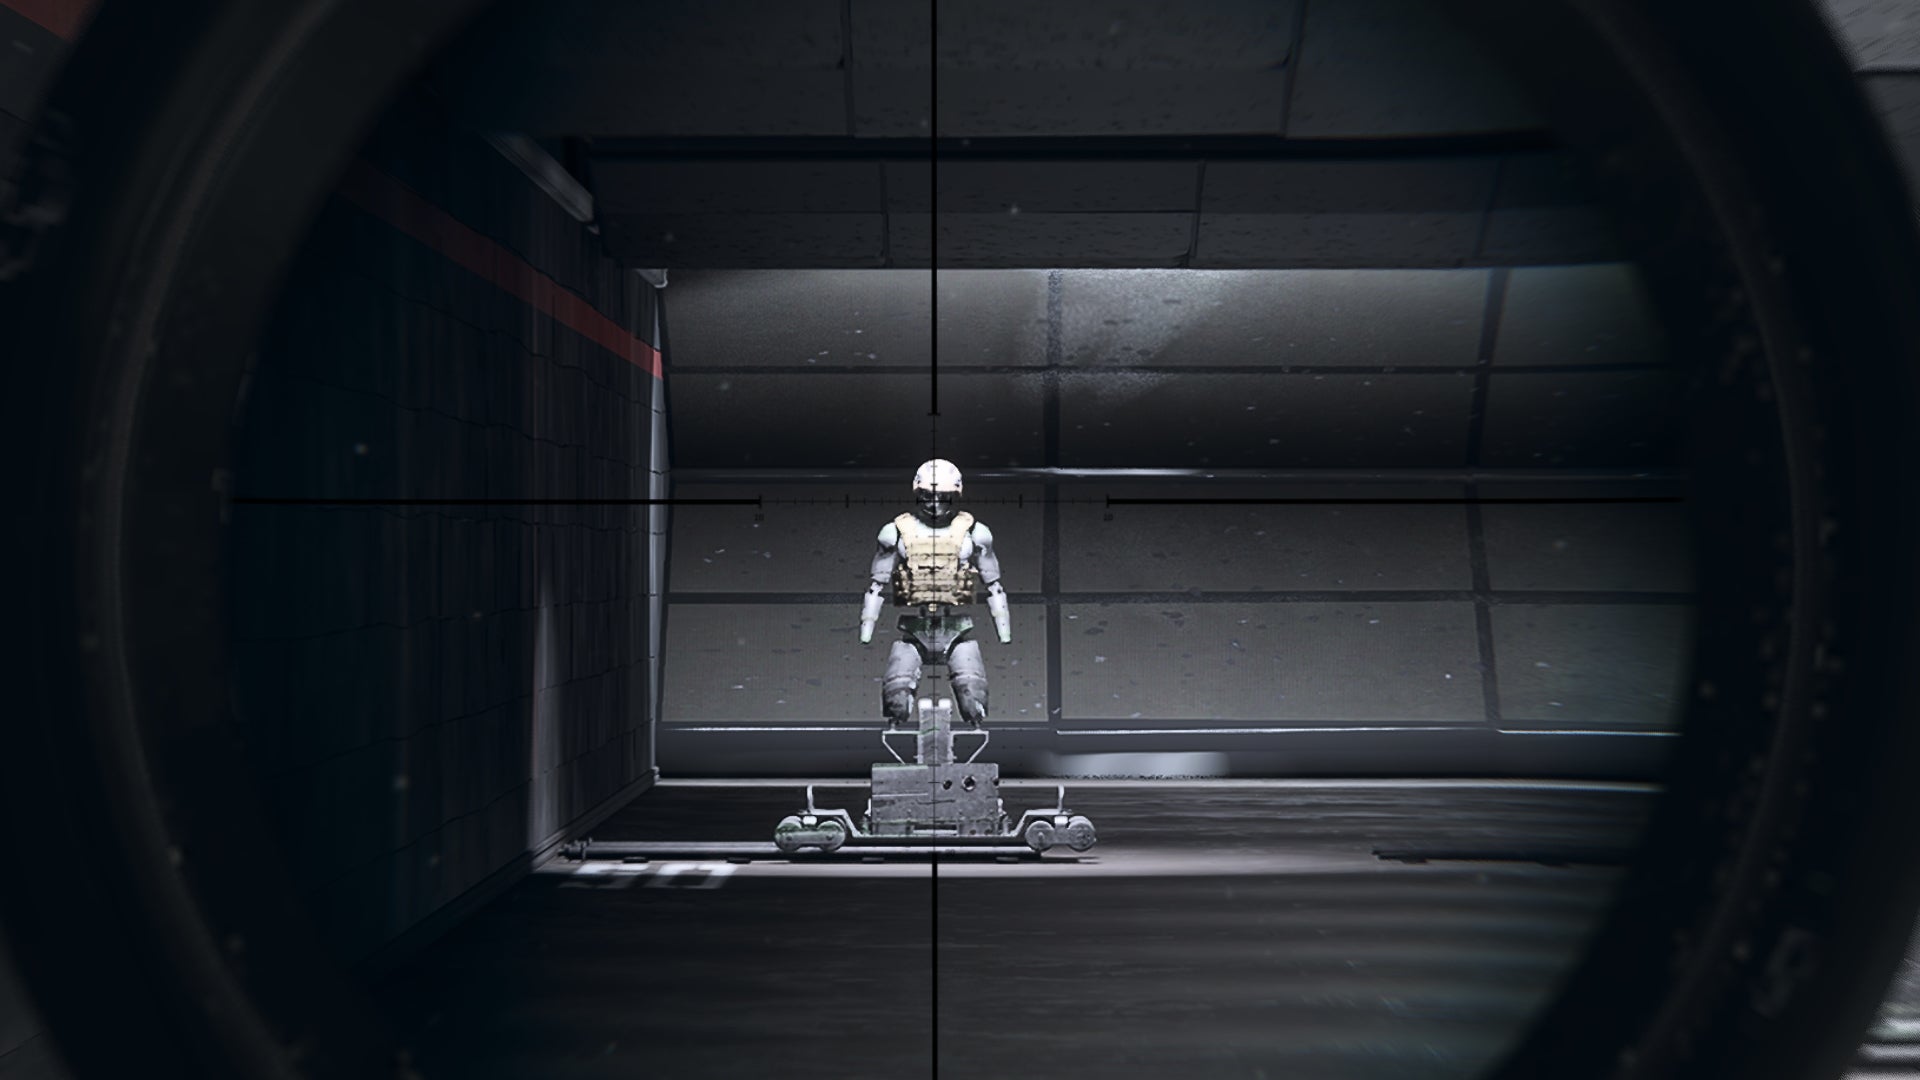 The player in Warzone 2.0 aims at a training dummy using the Victus 13x optic attachment.